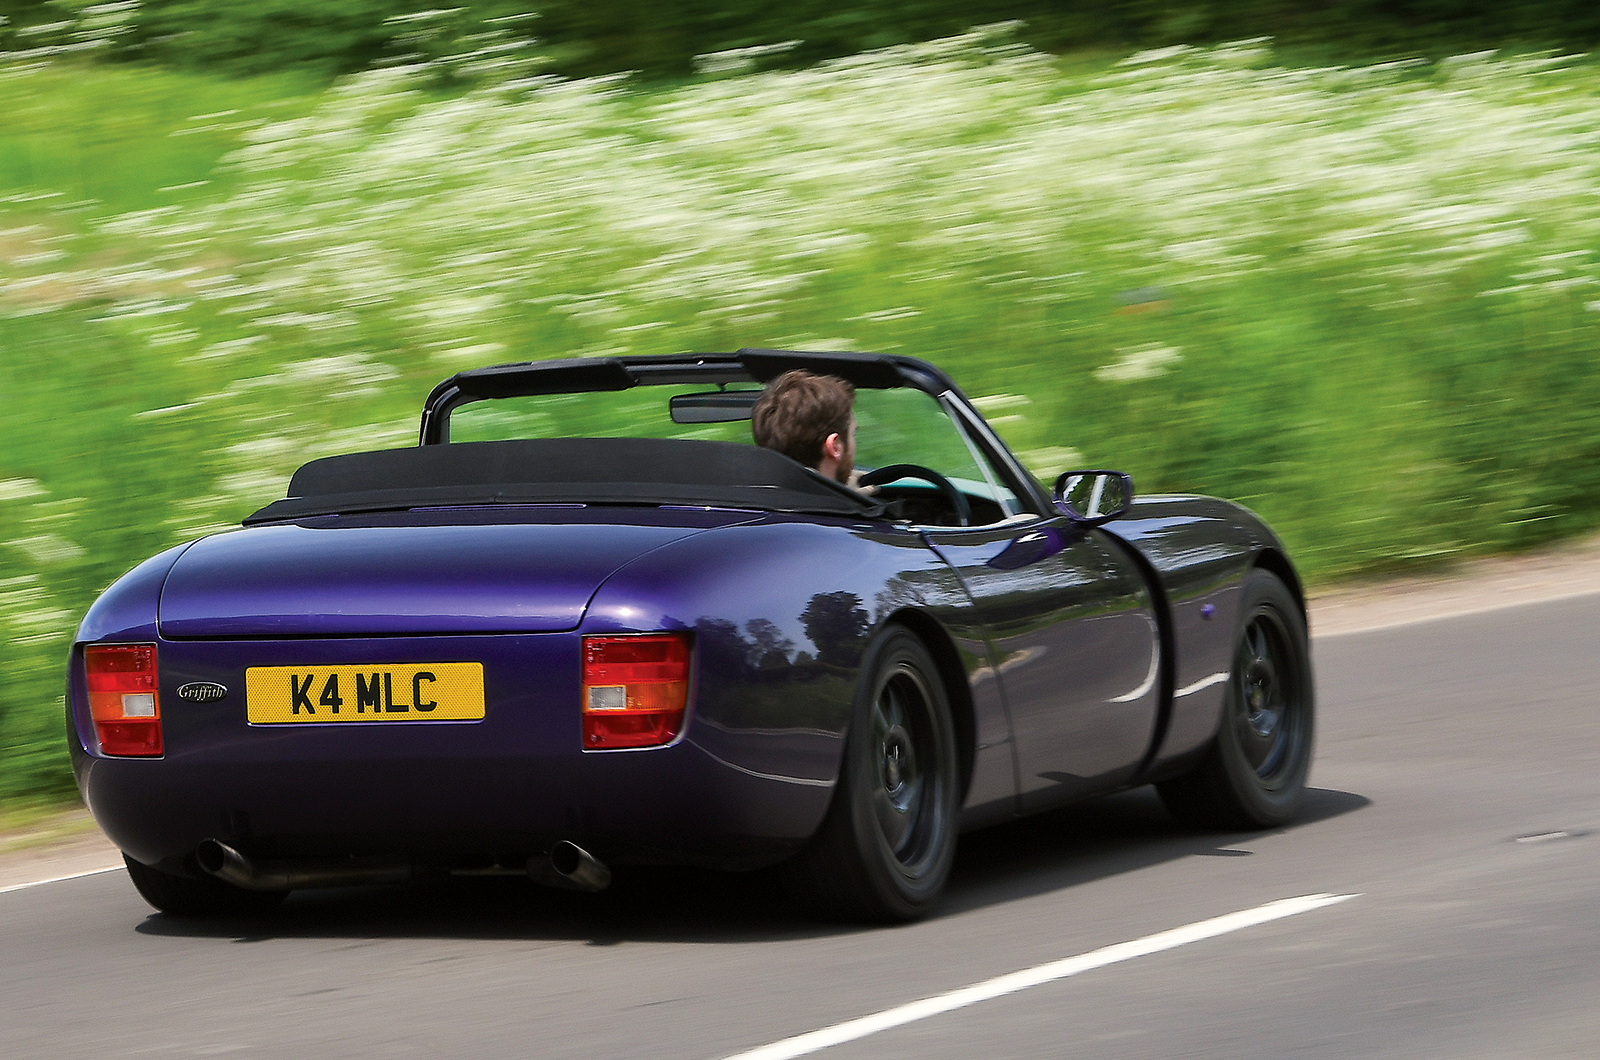 Classic & Sports Car – MG RV8 vs TVR Griffith vs Marcos Mantara: power to the people